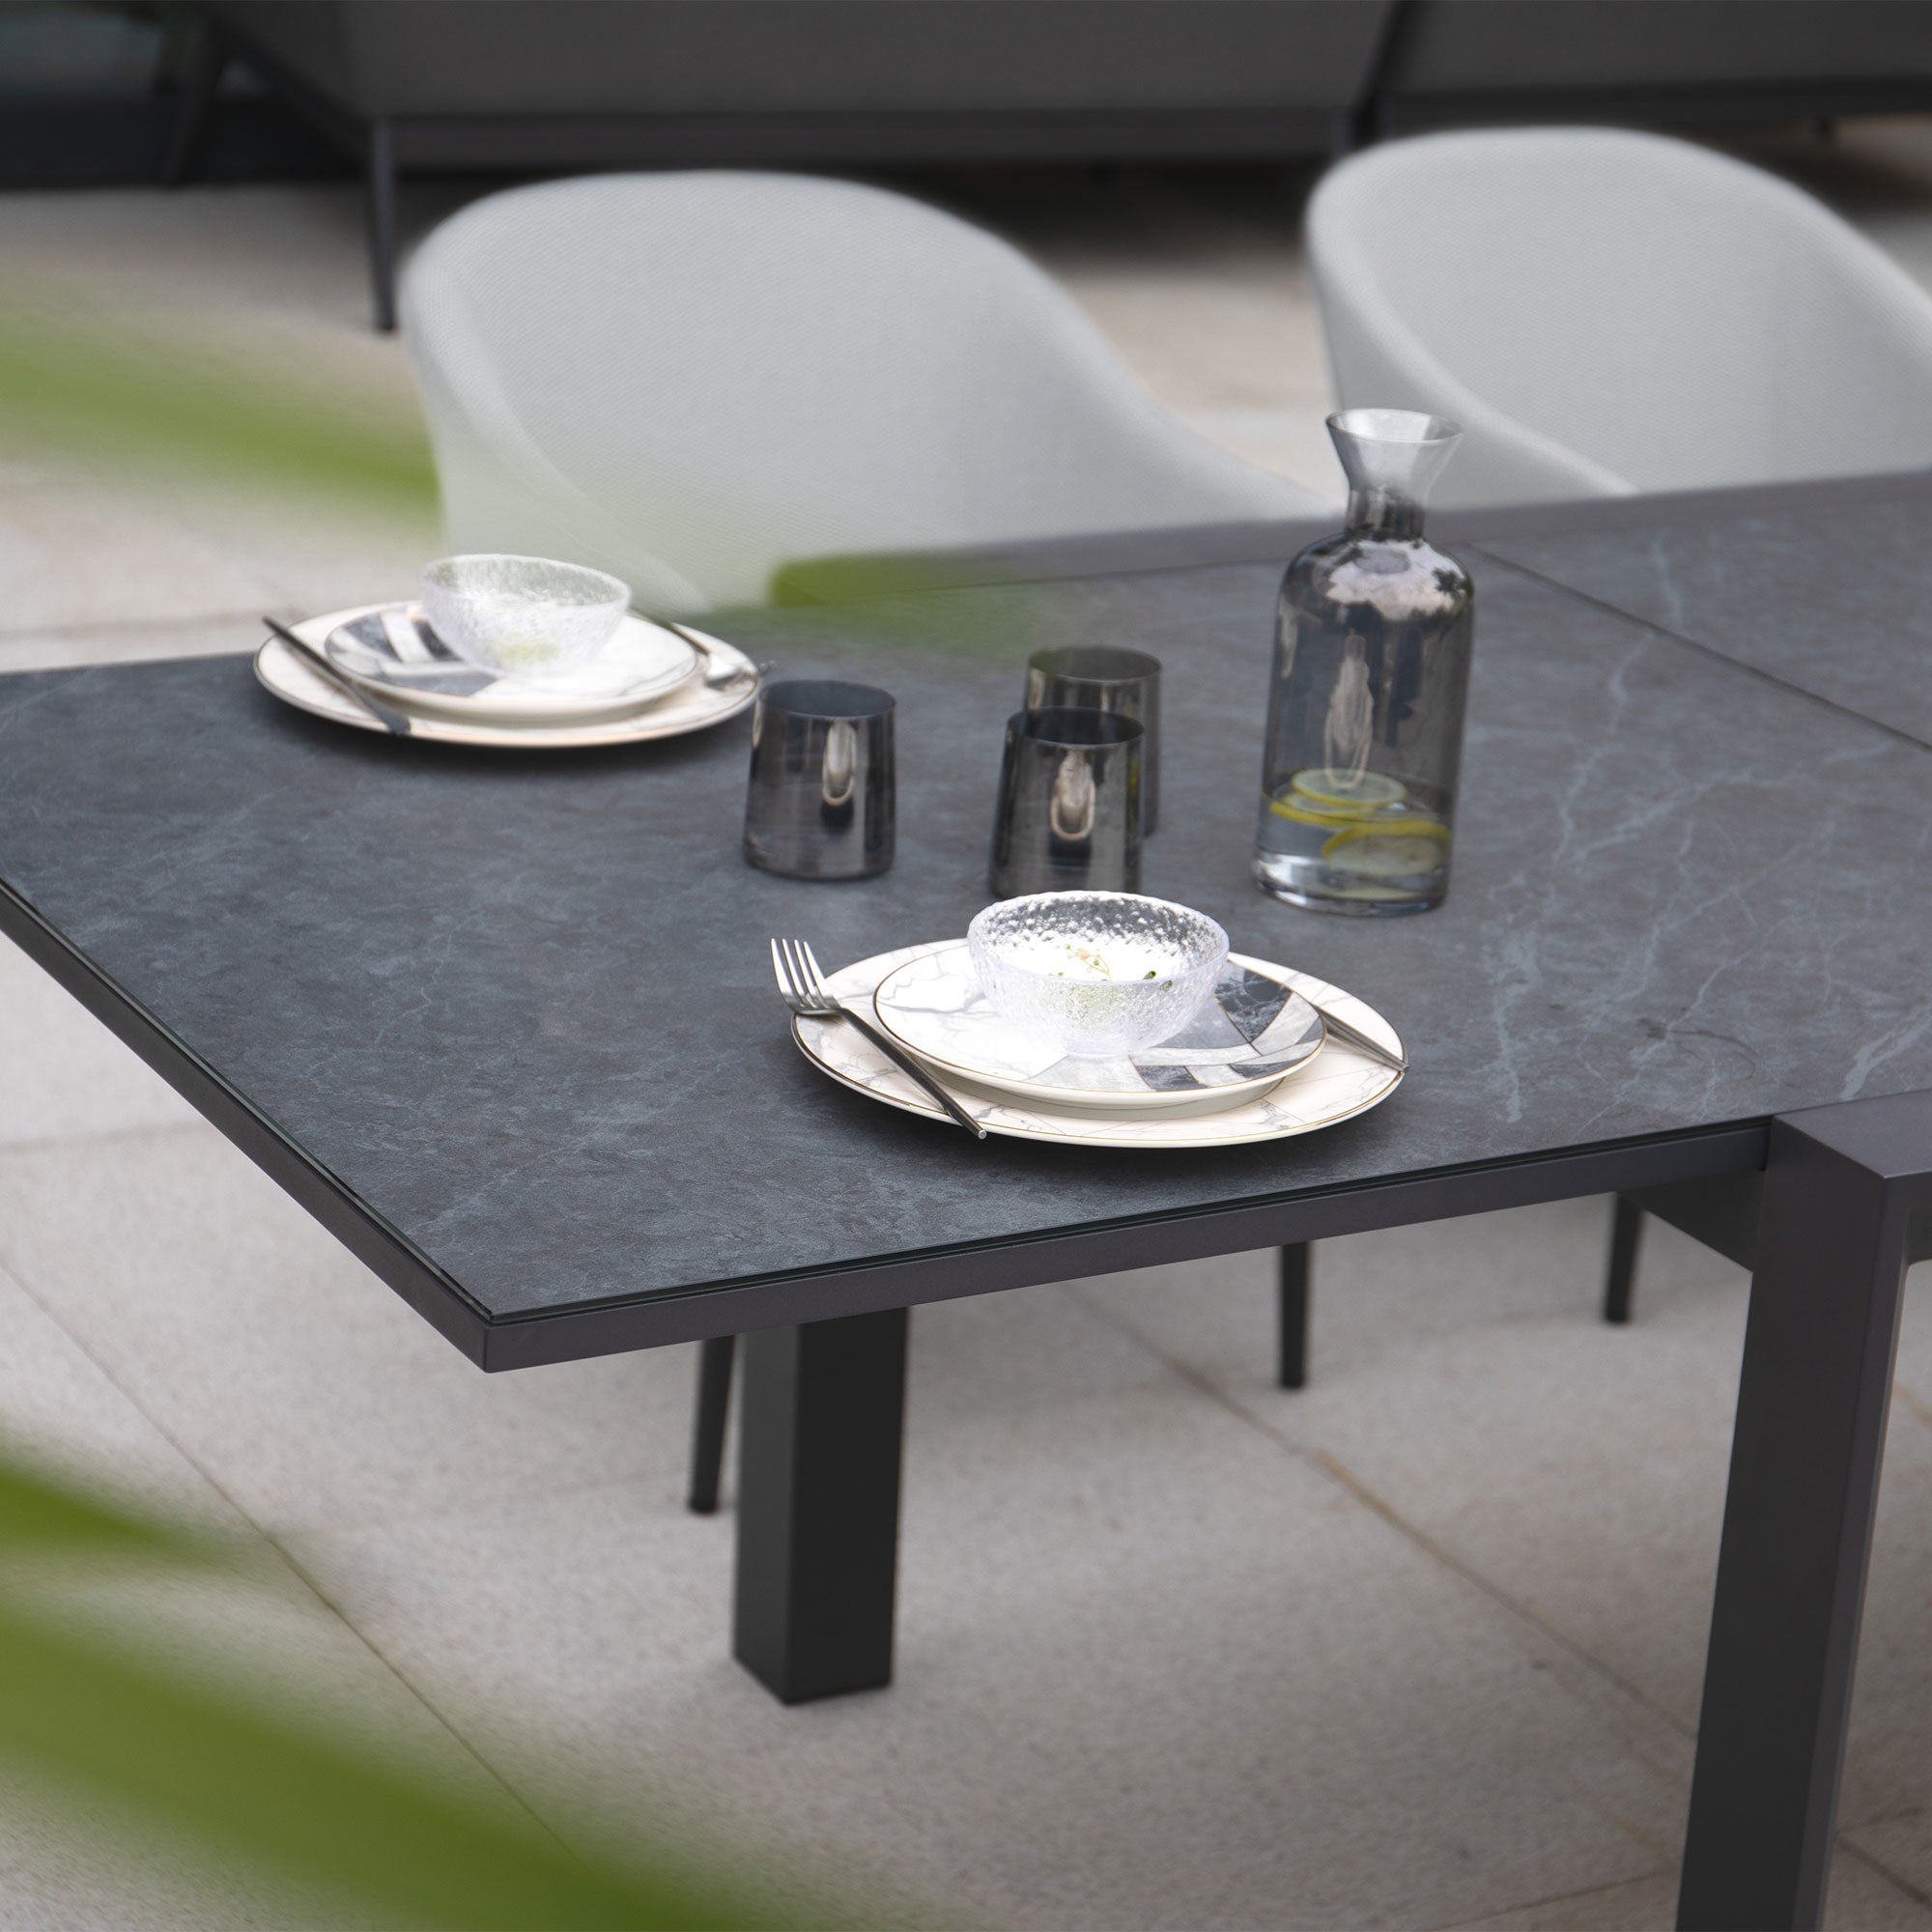 Luna 10 Seat Outdoor Fabric Extending Ceramic Dining Set in Oyster Grey